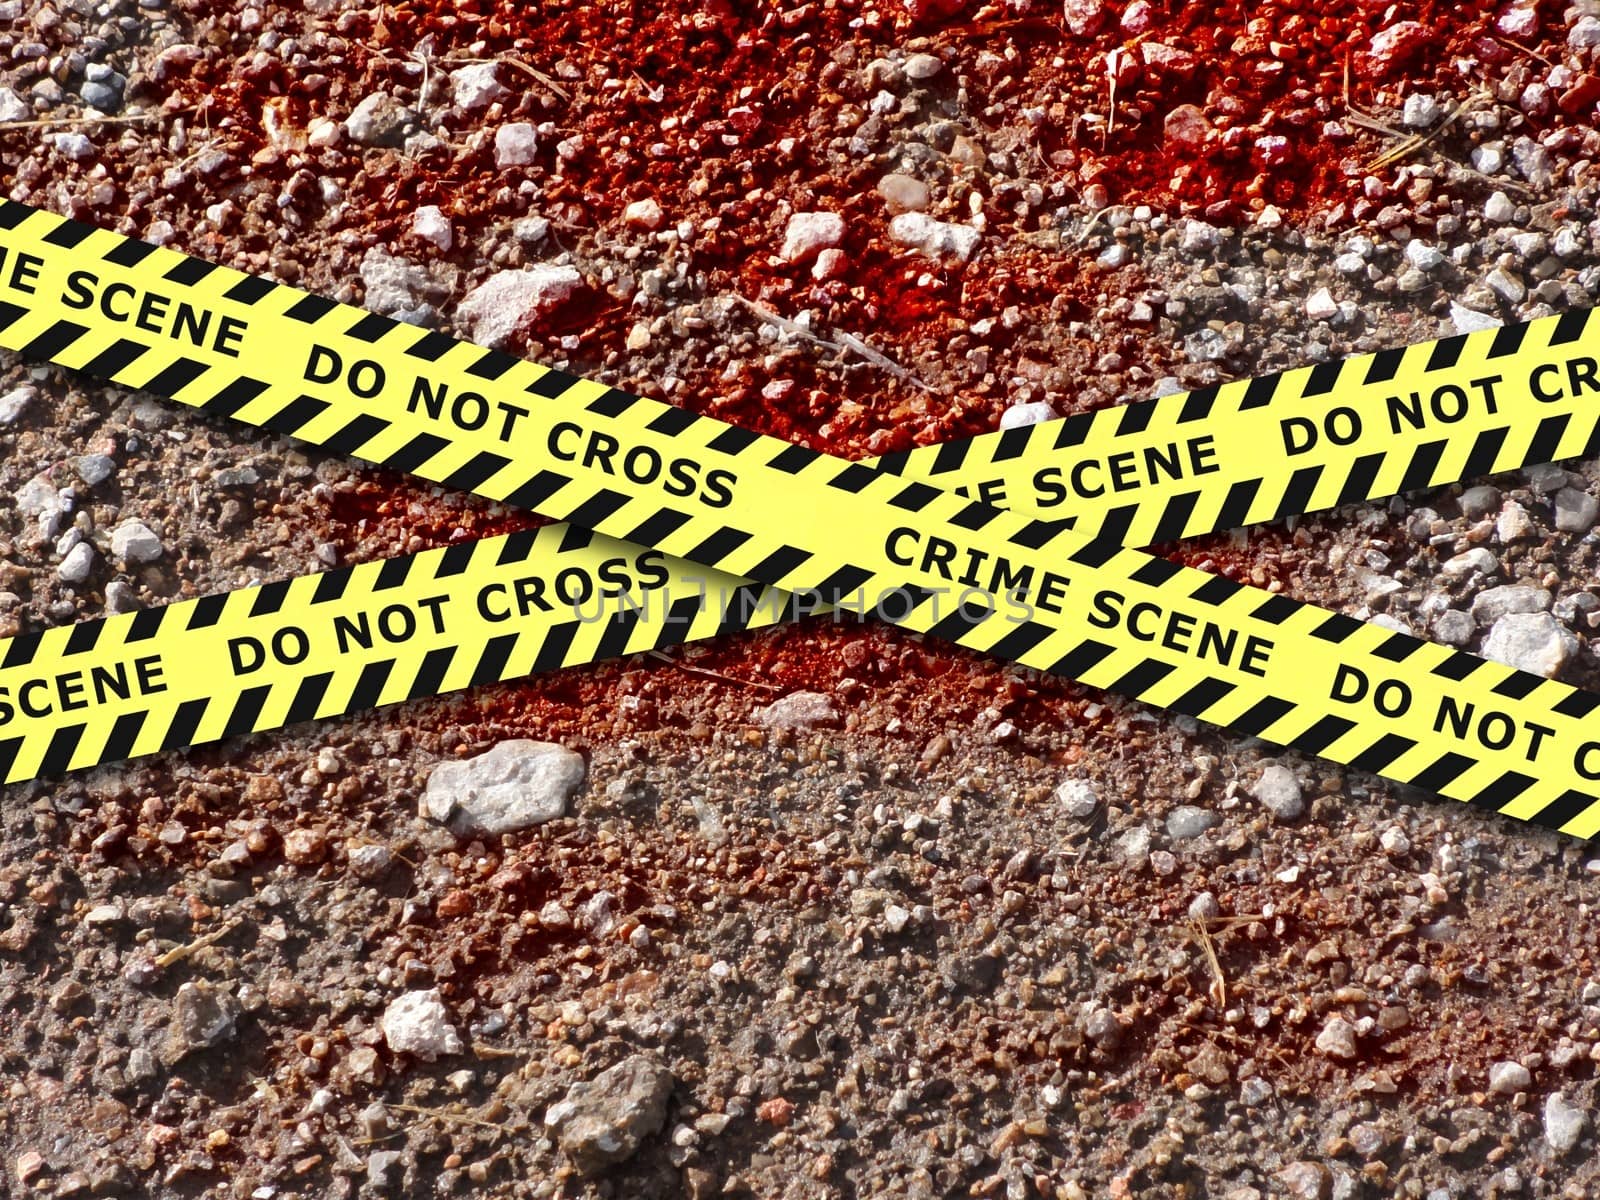 Illustration of blood soaked ground with crime scene tape